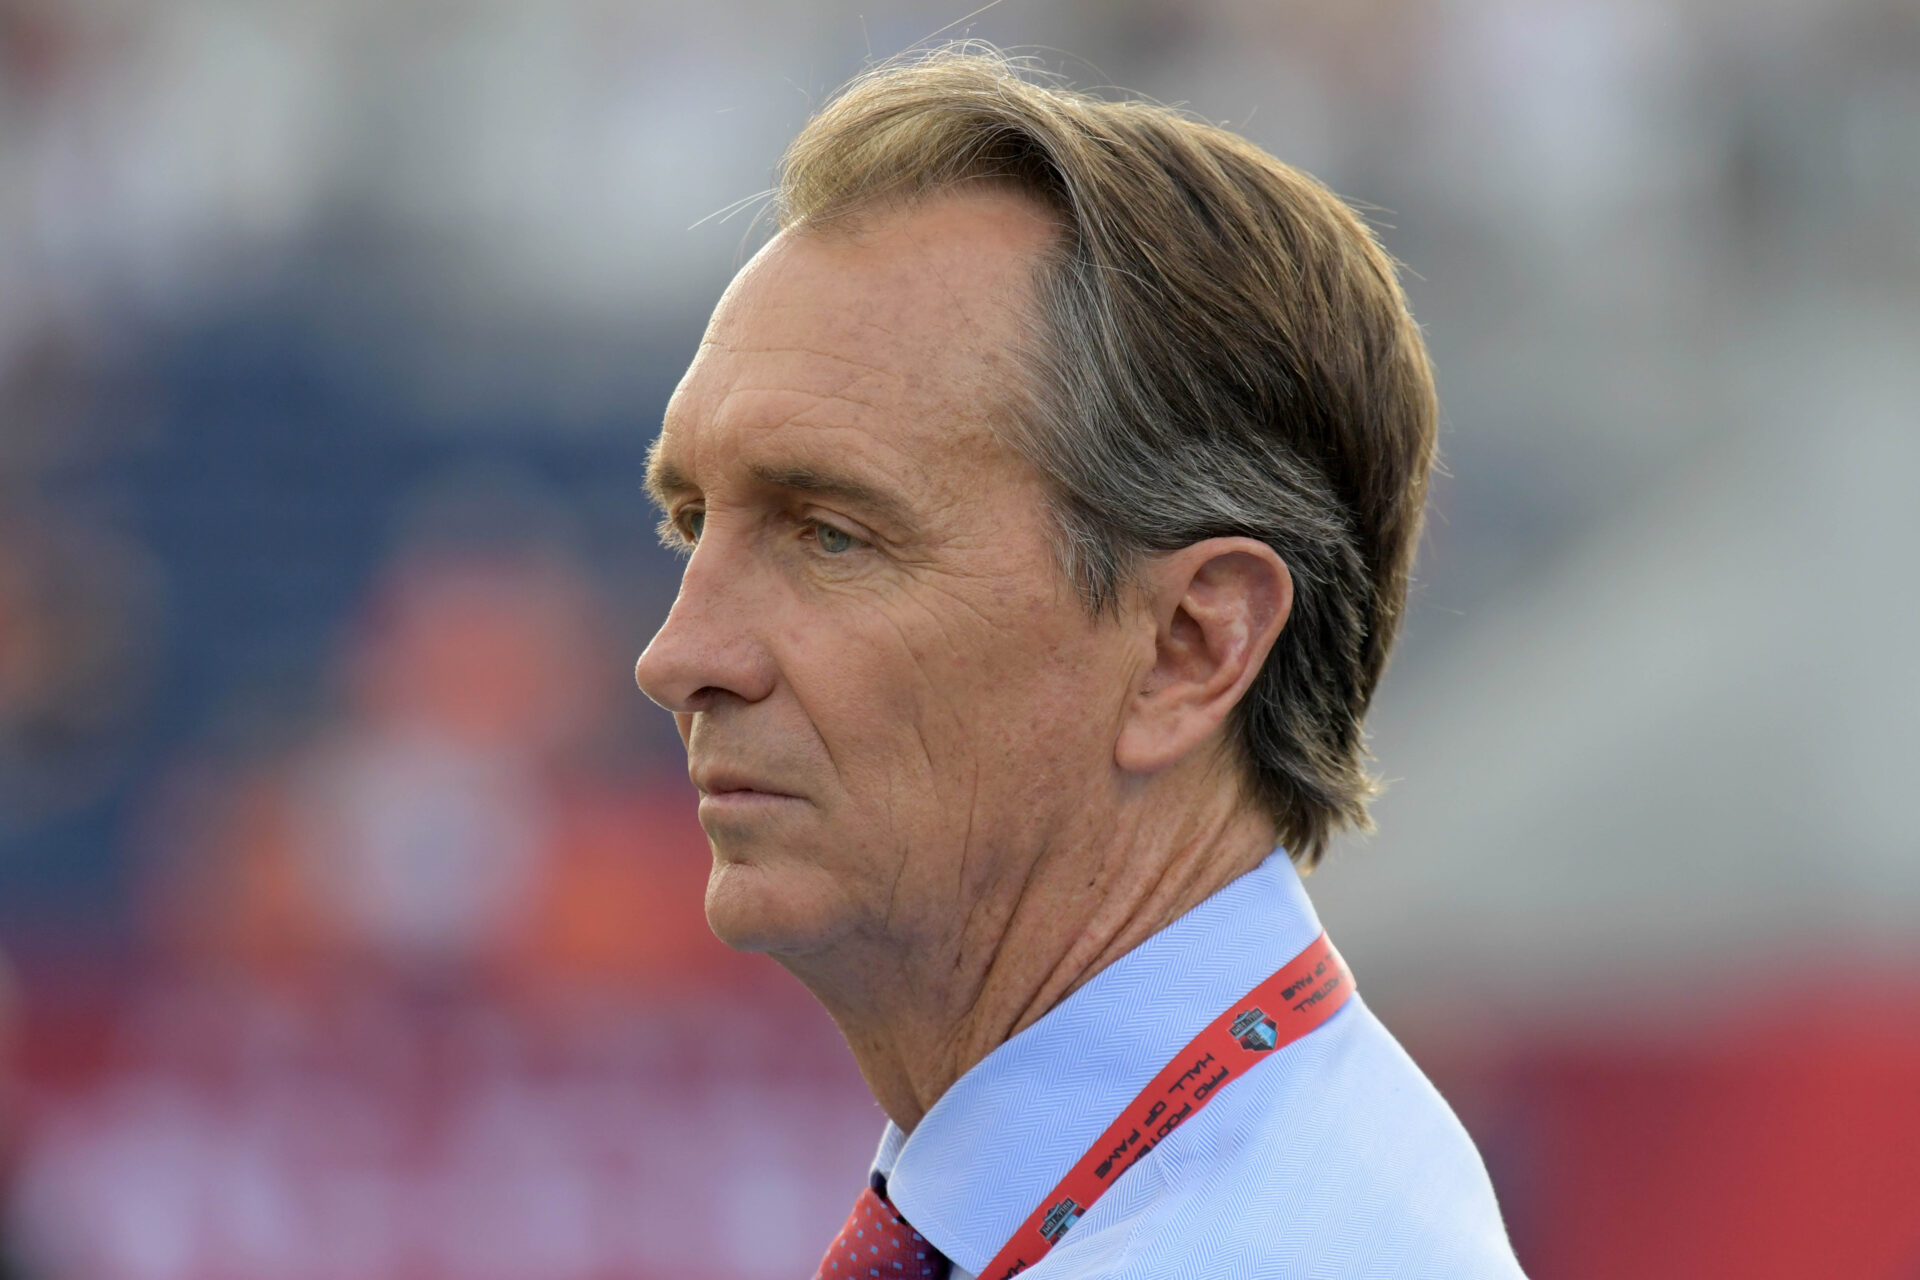 NBC Sunday Night Football analyst Cris Collinsworth during the Pro Football Hall of Fame Game between the Denver Broncos and the Atlanta Falcons at Tom Benson Hall of Fame Stadium.